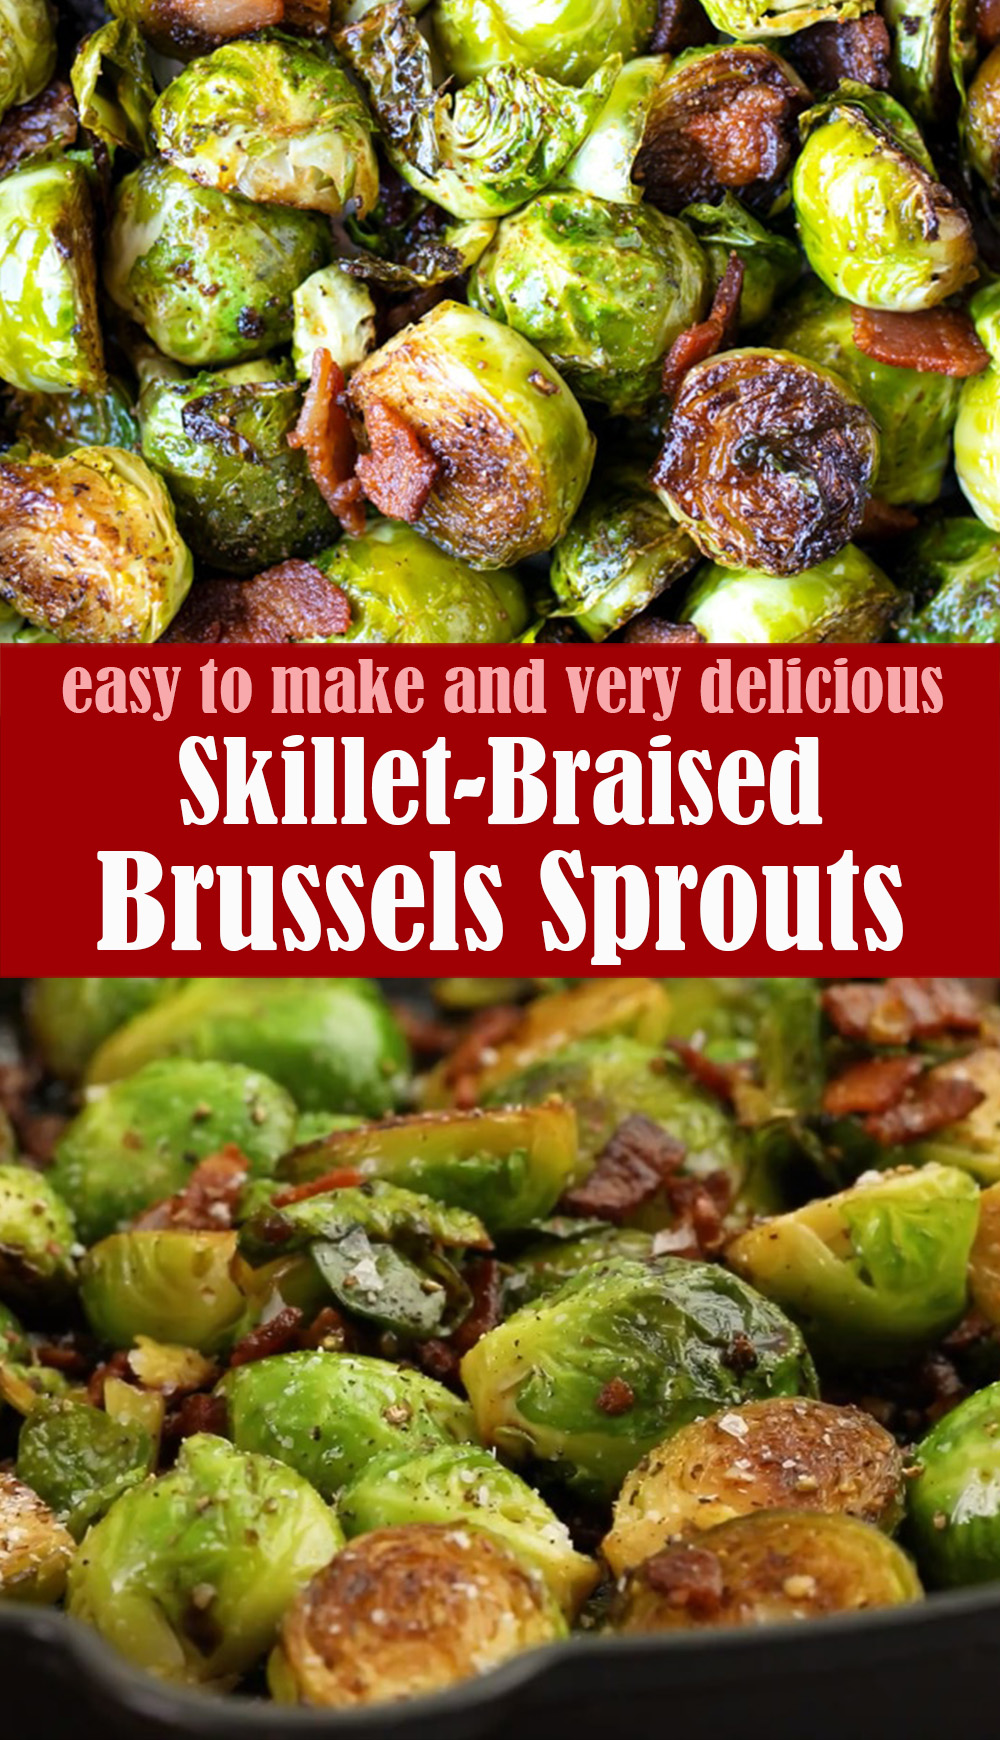 Skillet-Braised Brussels Sprouts With Bacon